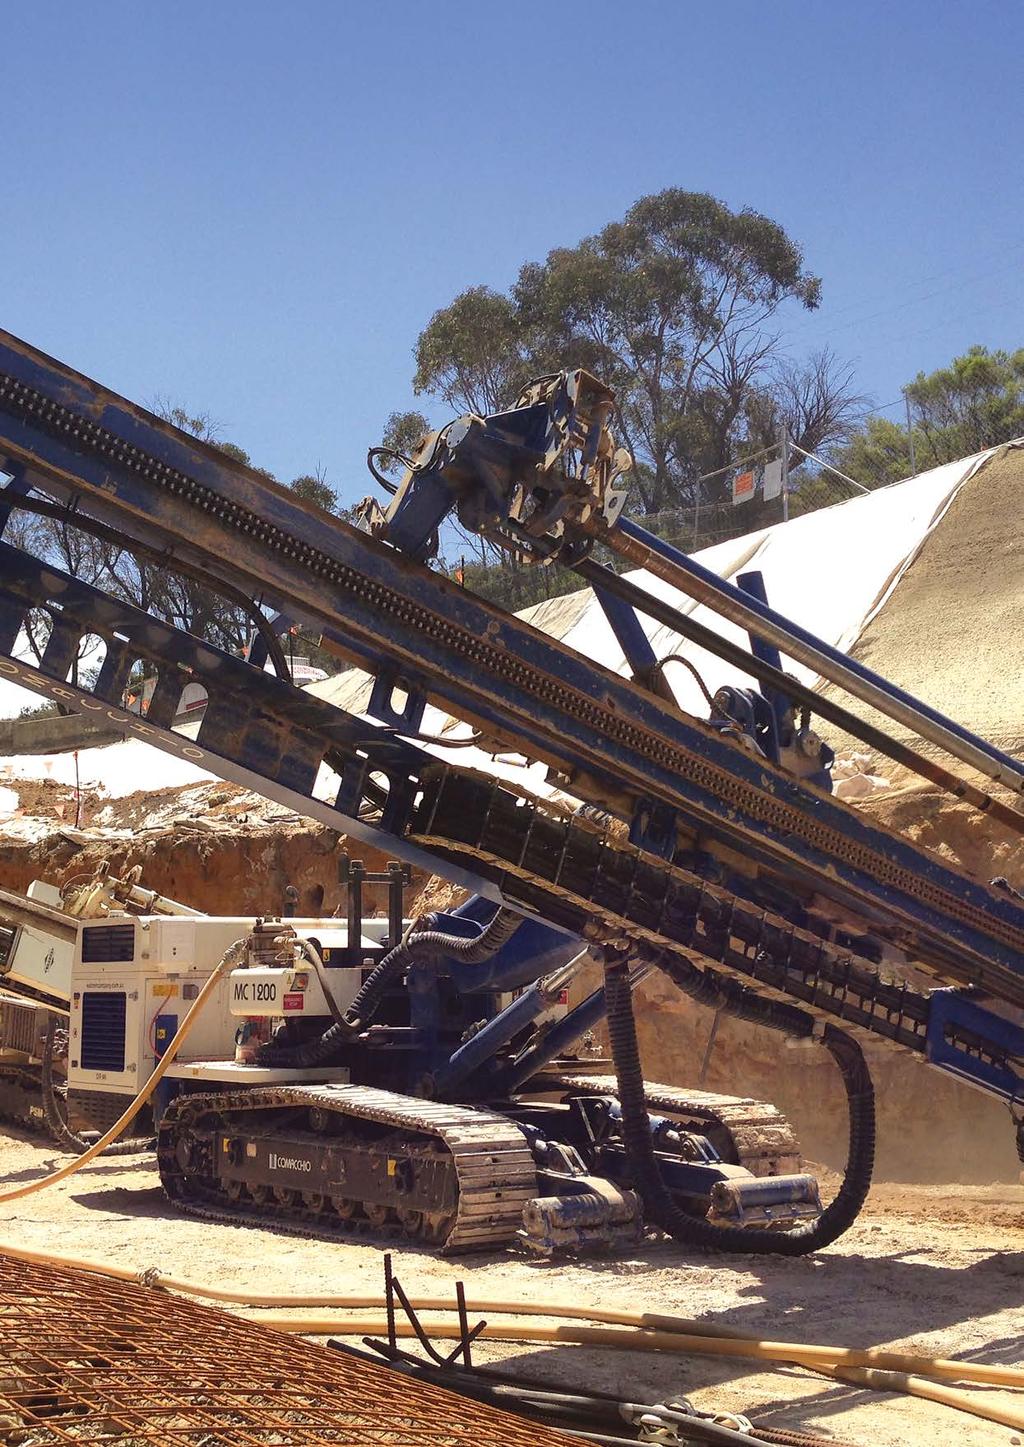 Plant and Equipment We have some of the best plant and equipment available to complete our projects. All of our machinery complies with the Australian Standards and Workcover requirements.